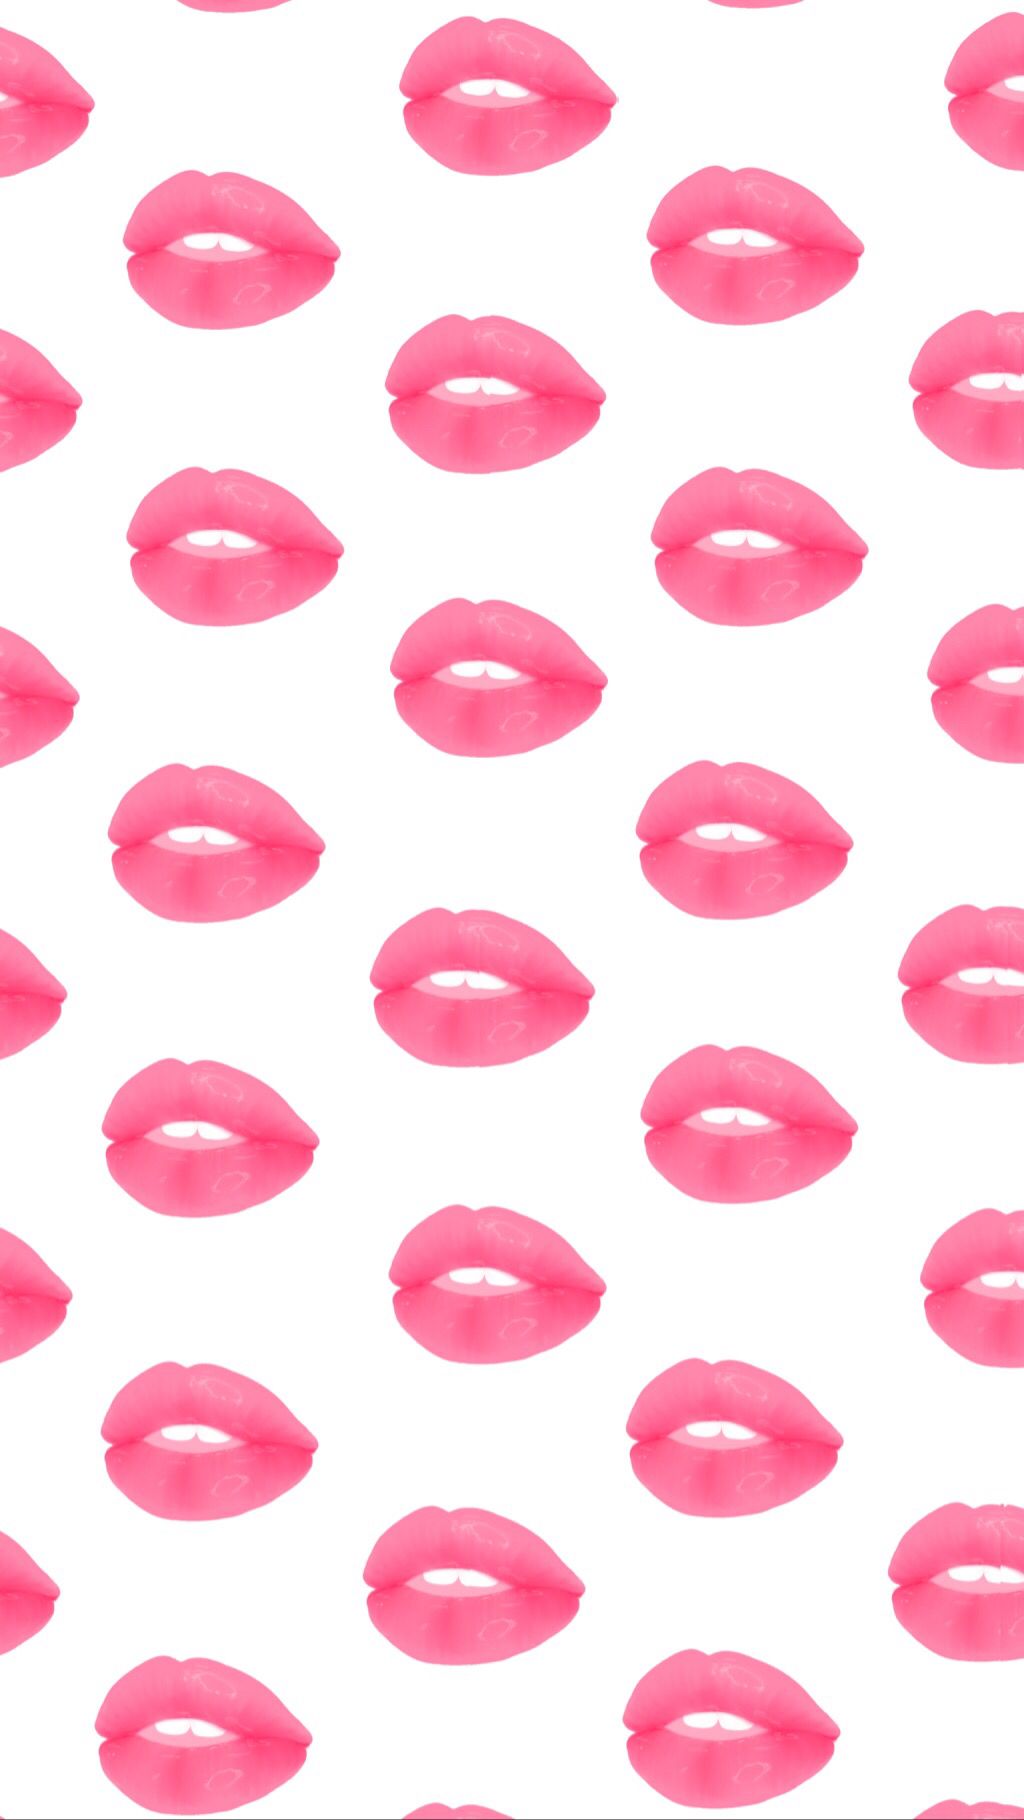 A pattern of pink lips on a white background - Lips